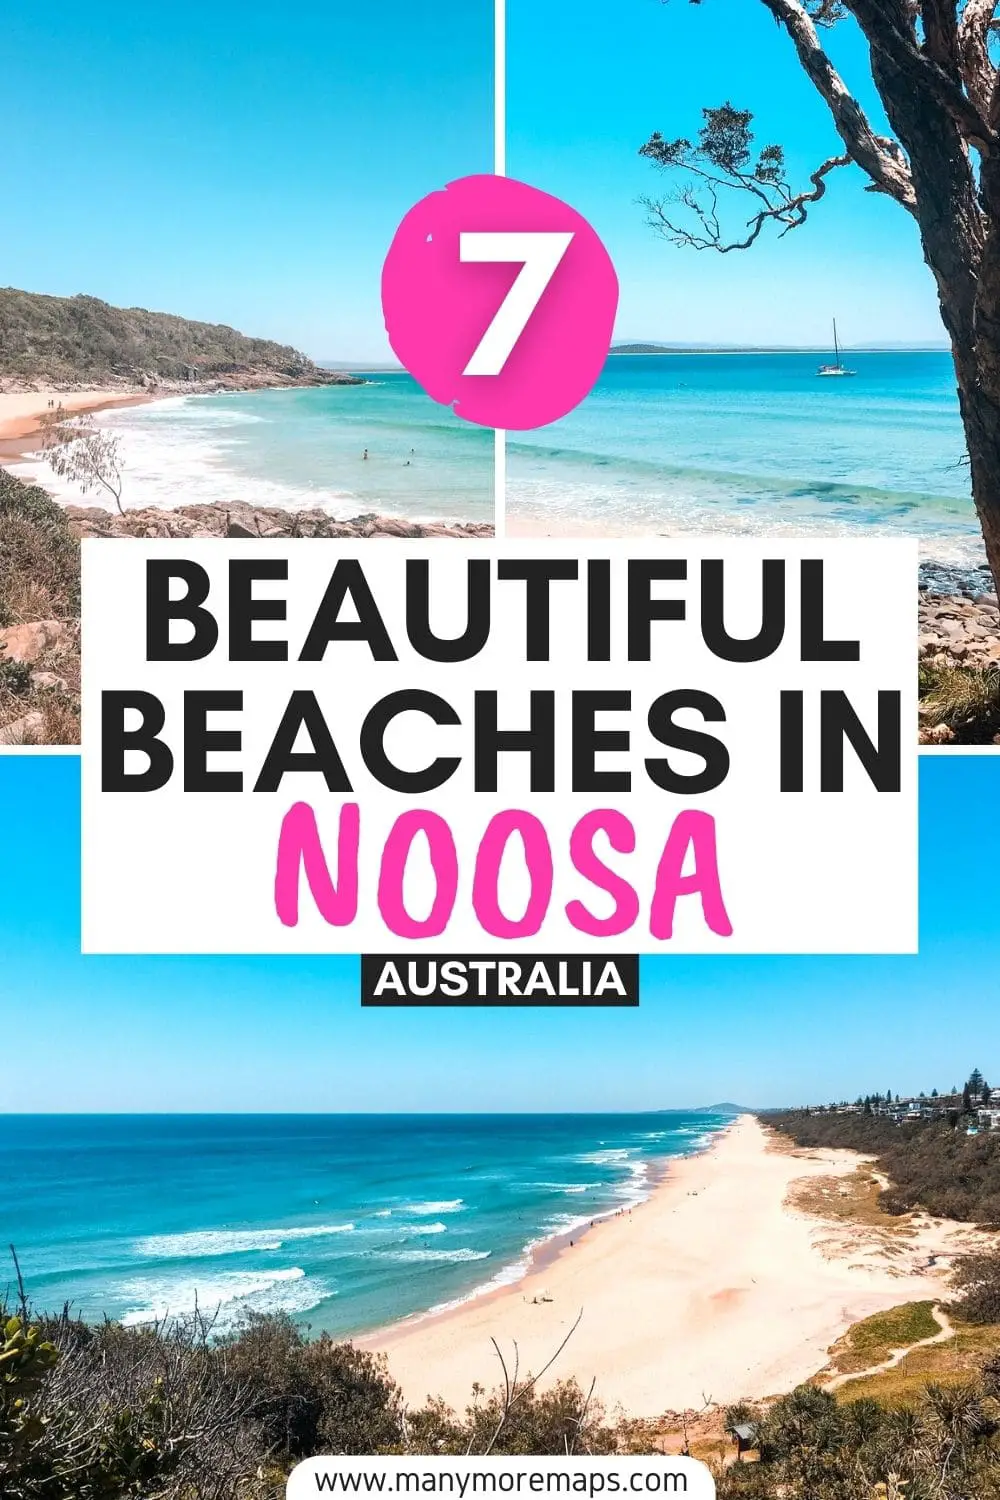 Love nothing more than lazing on the beach? Then the Sunshine Coast town of Noosa in Queensland Australia has got you covered! Check out this guide to the most beautiful beaches in Noosa, including Sunshine Beach, Noosa Main Beach, the Noosa fairy pools, beaches in Noosa National Park, beaches at the Noosa Heads and more!